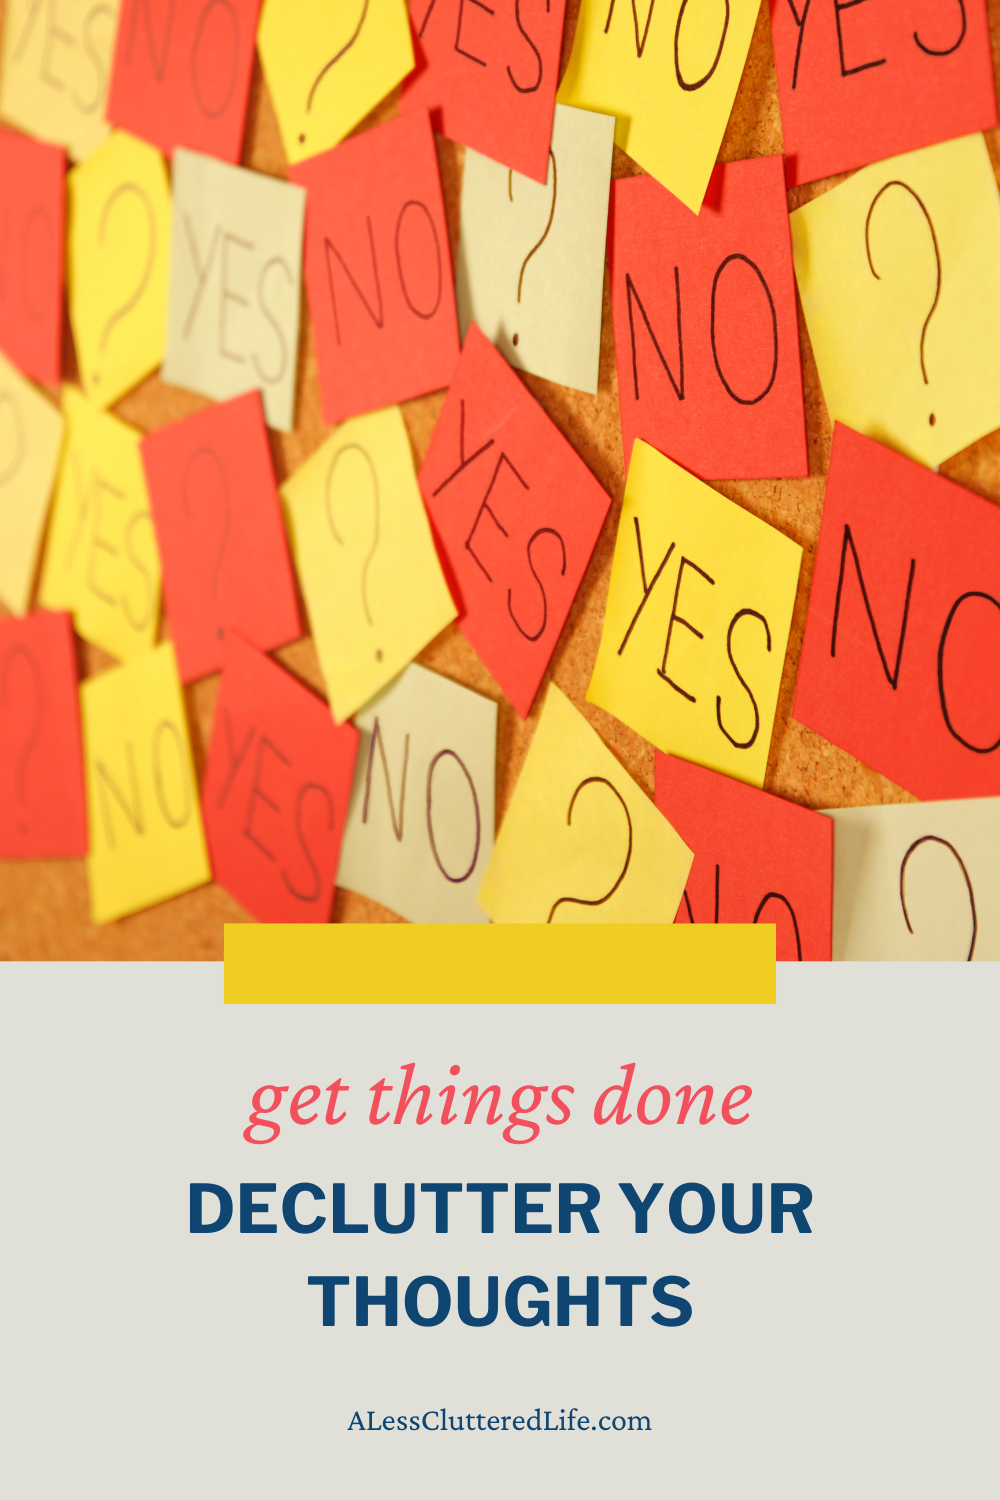 Graphic for ALessClutteredLife.com's article Declutter Your Thoughts. Picture